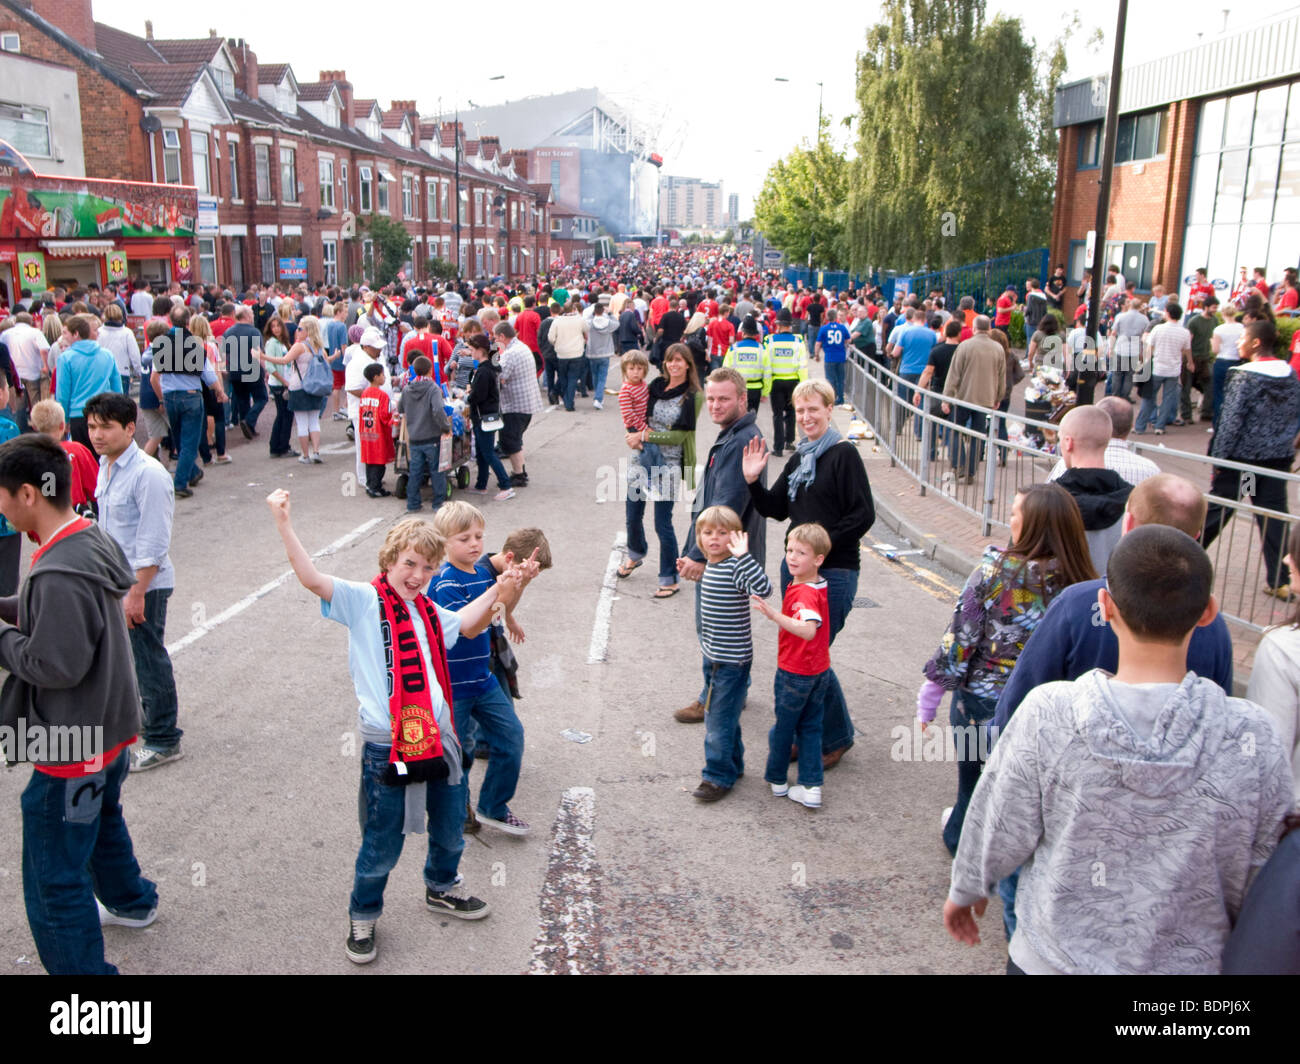 Manchester United fans outside the old trafford stadium in manchester before the friendly game against Valencia in August 2009 Stock Photo